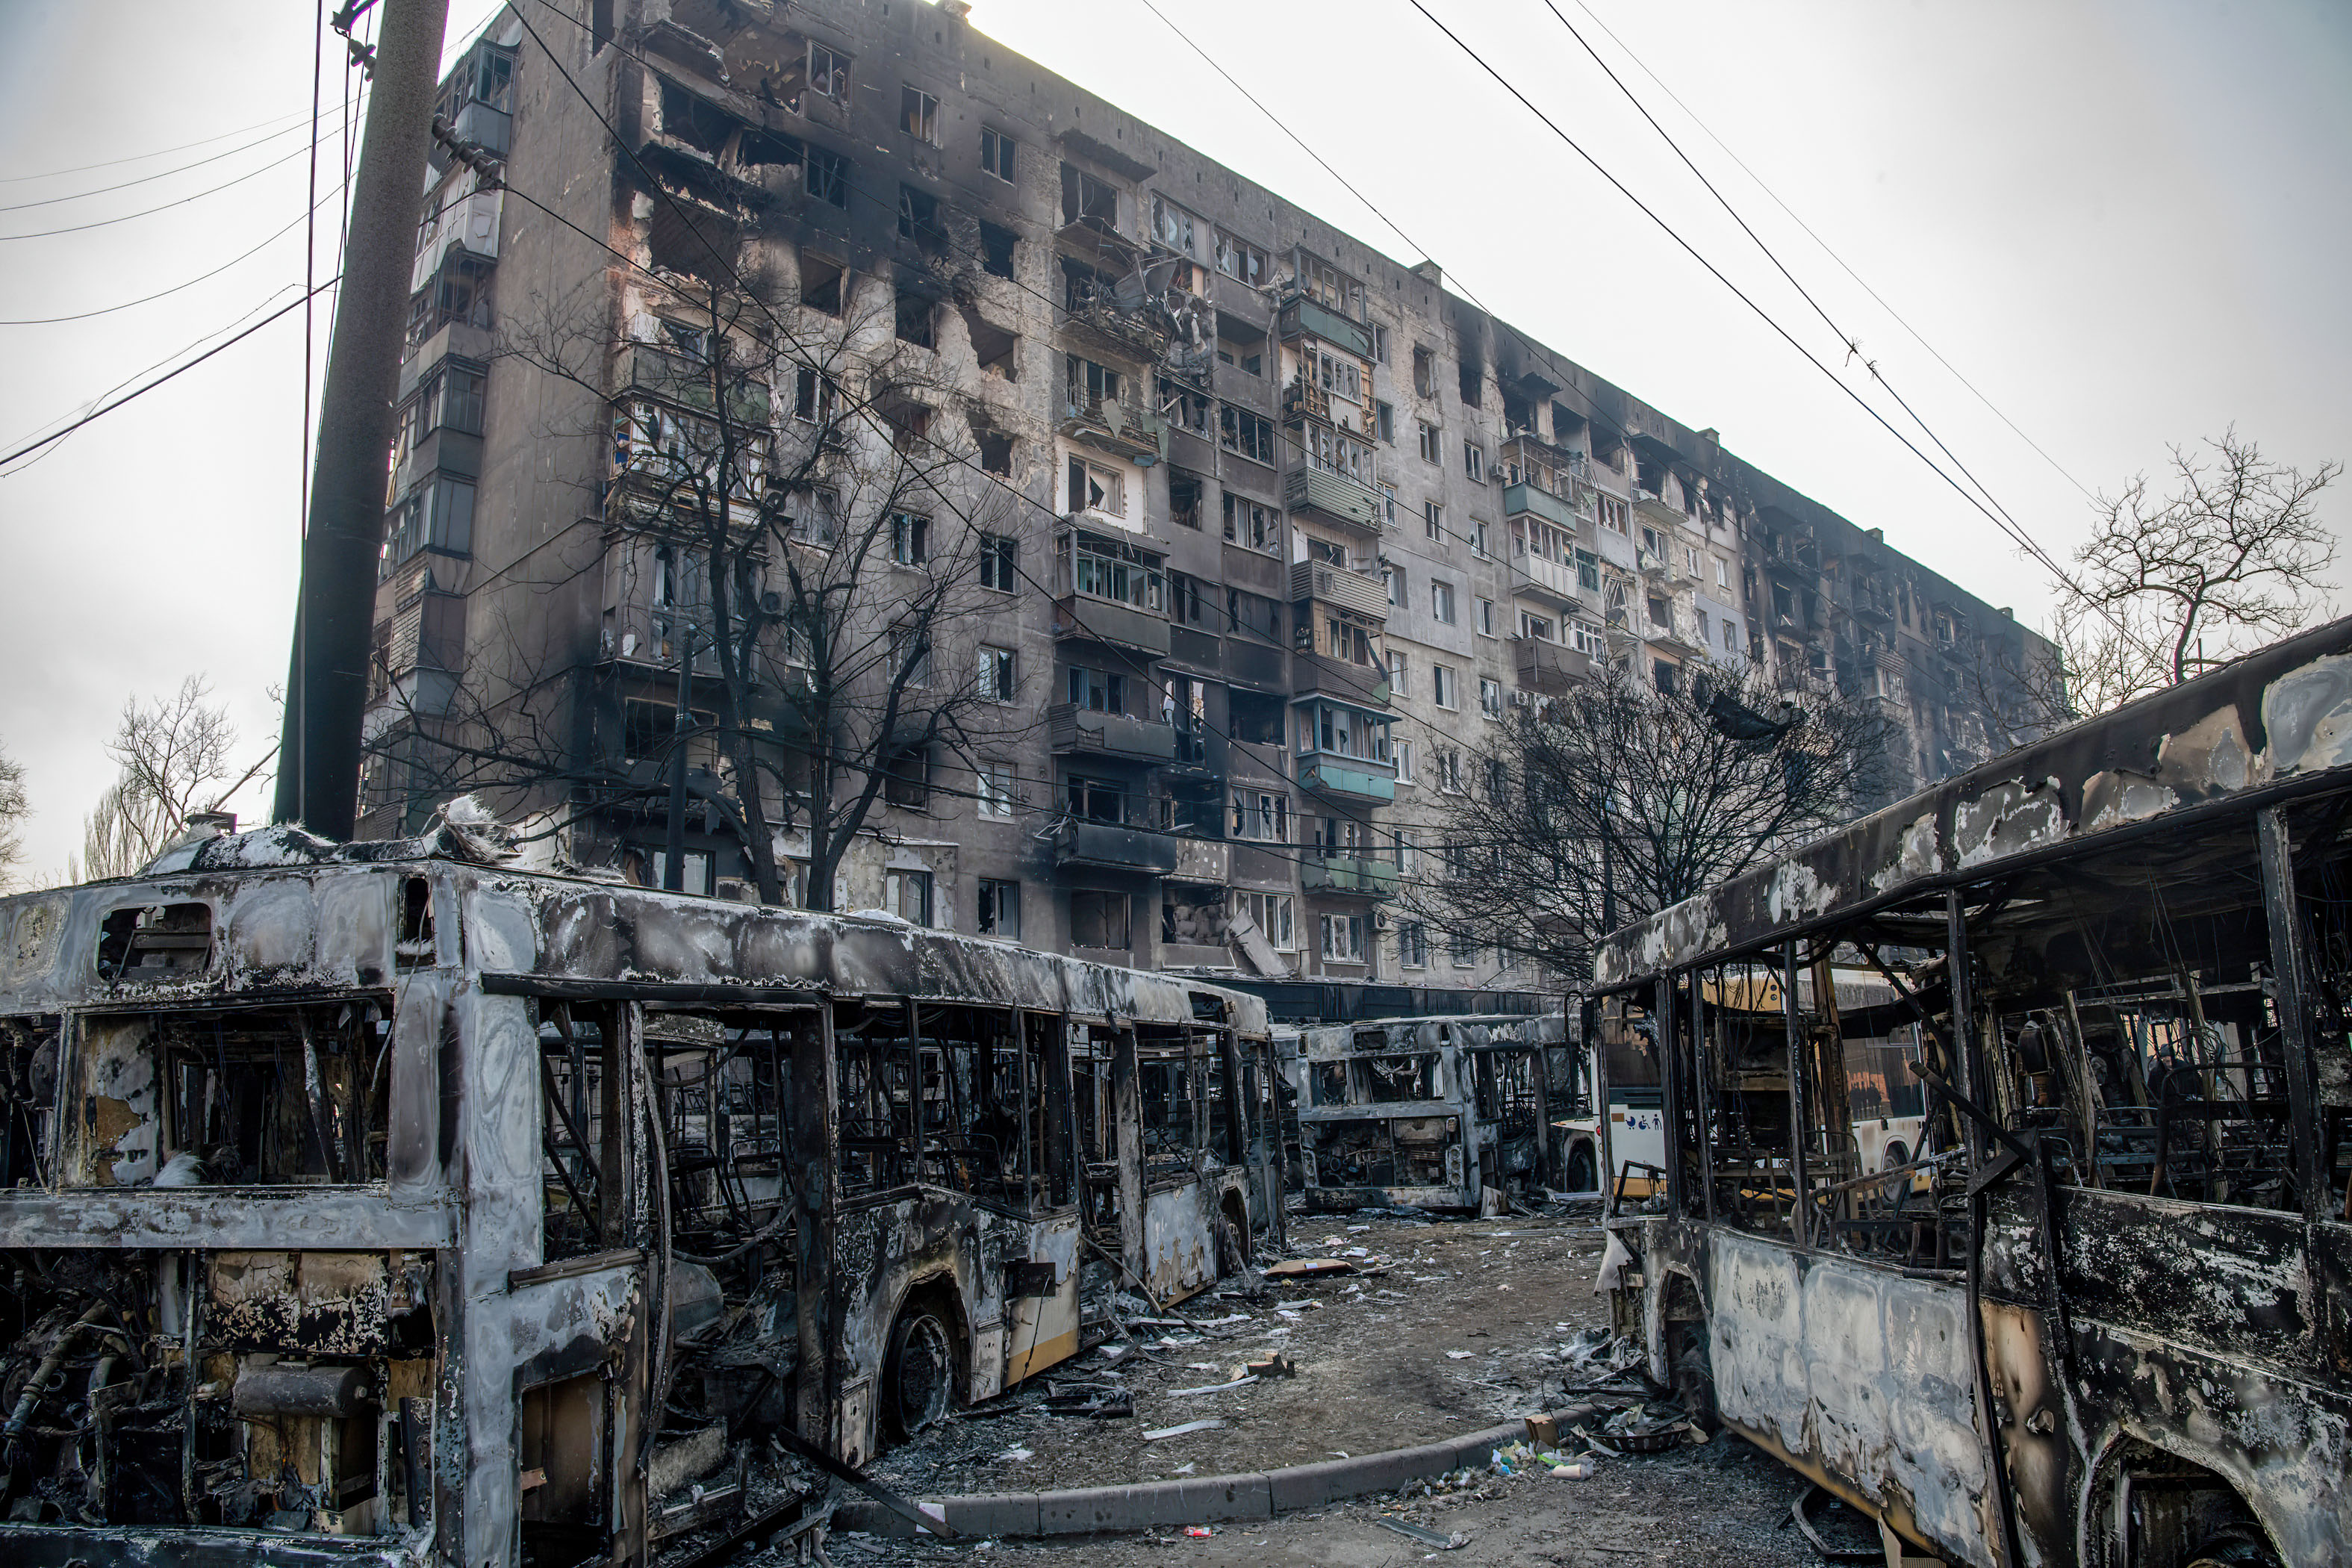 Destruction on the streets of Mariupol, Ukraine, on March 23.